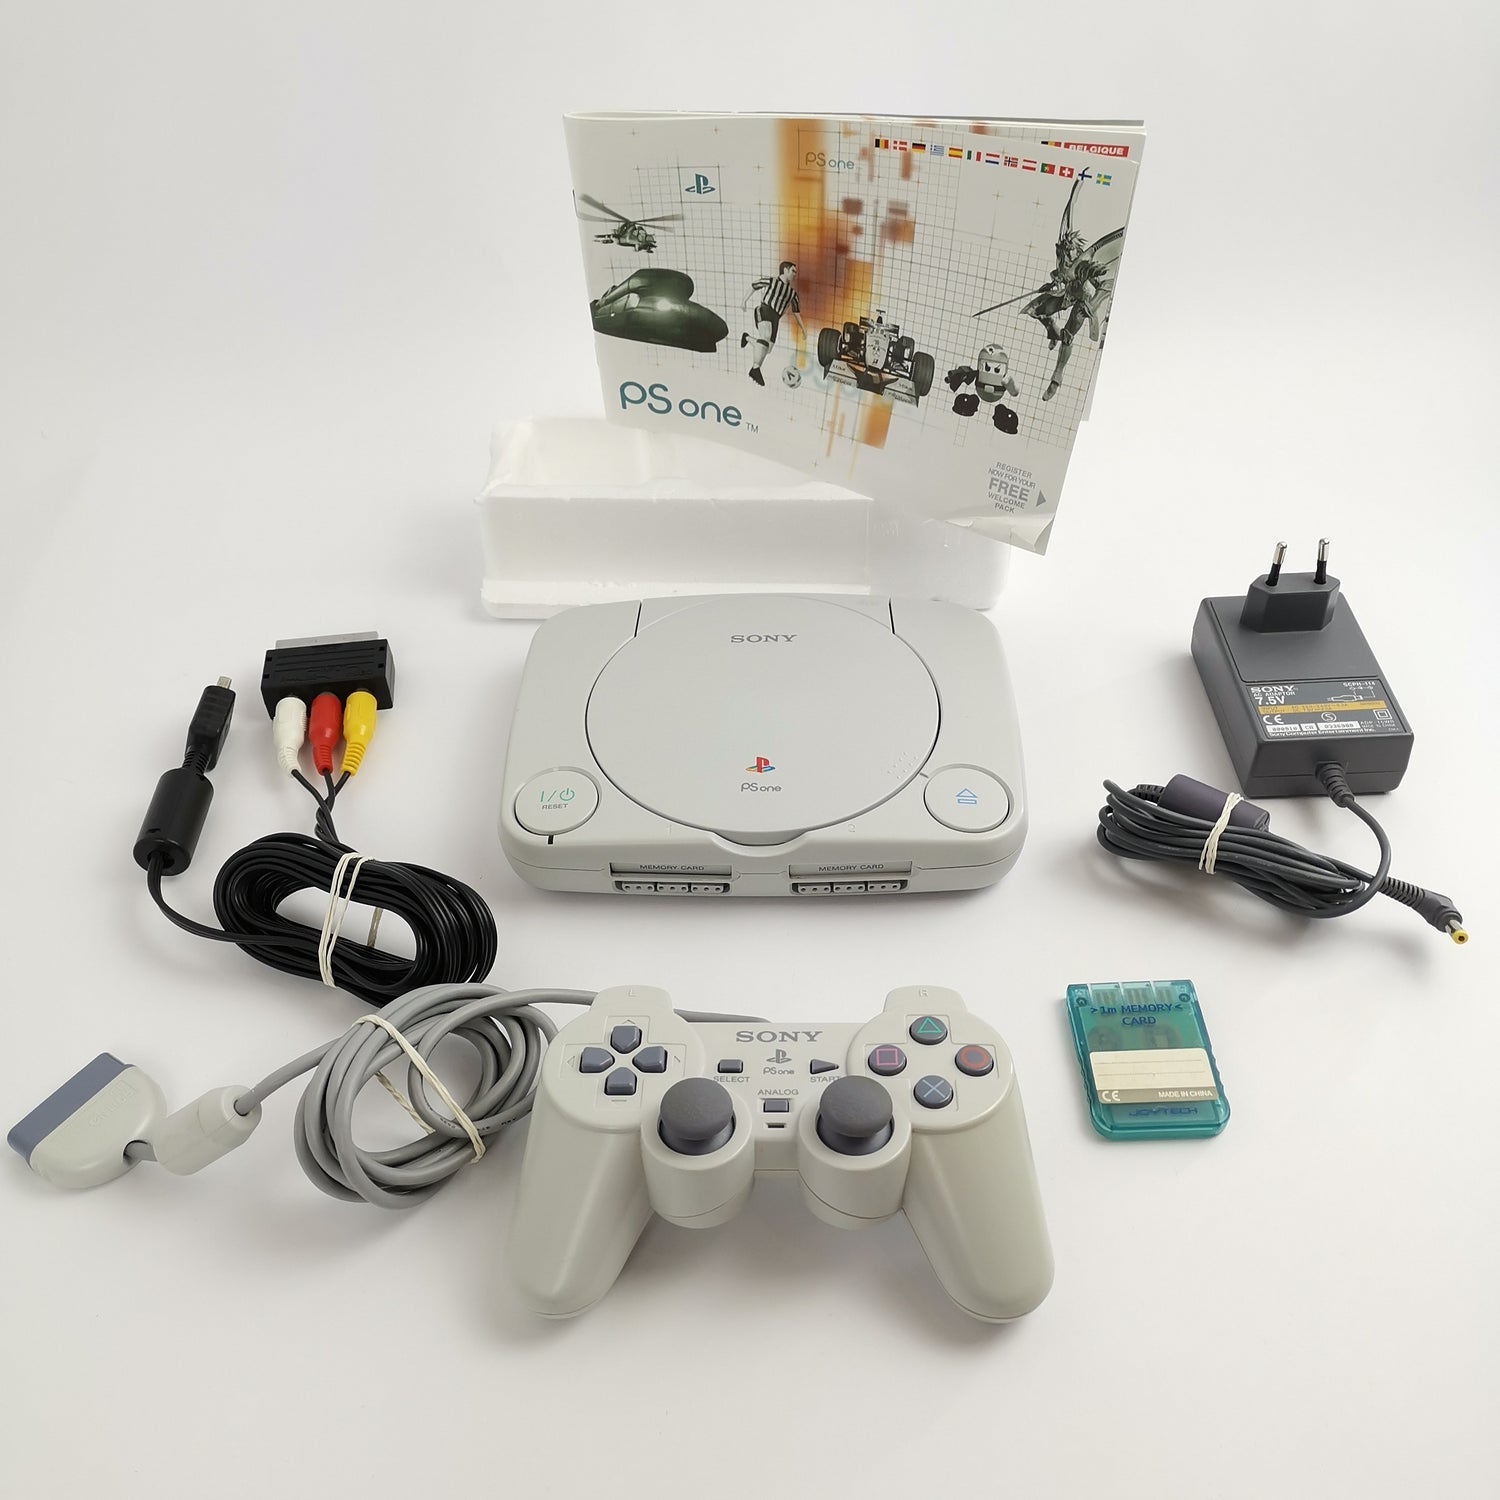 Sony Playstation 1 Console: Sony PSone SCPH-102 C | Original packaging PAL - PSX PS1